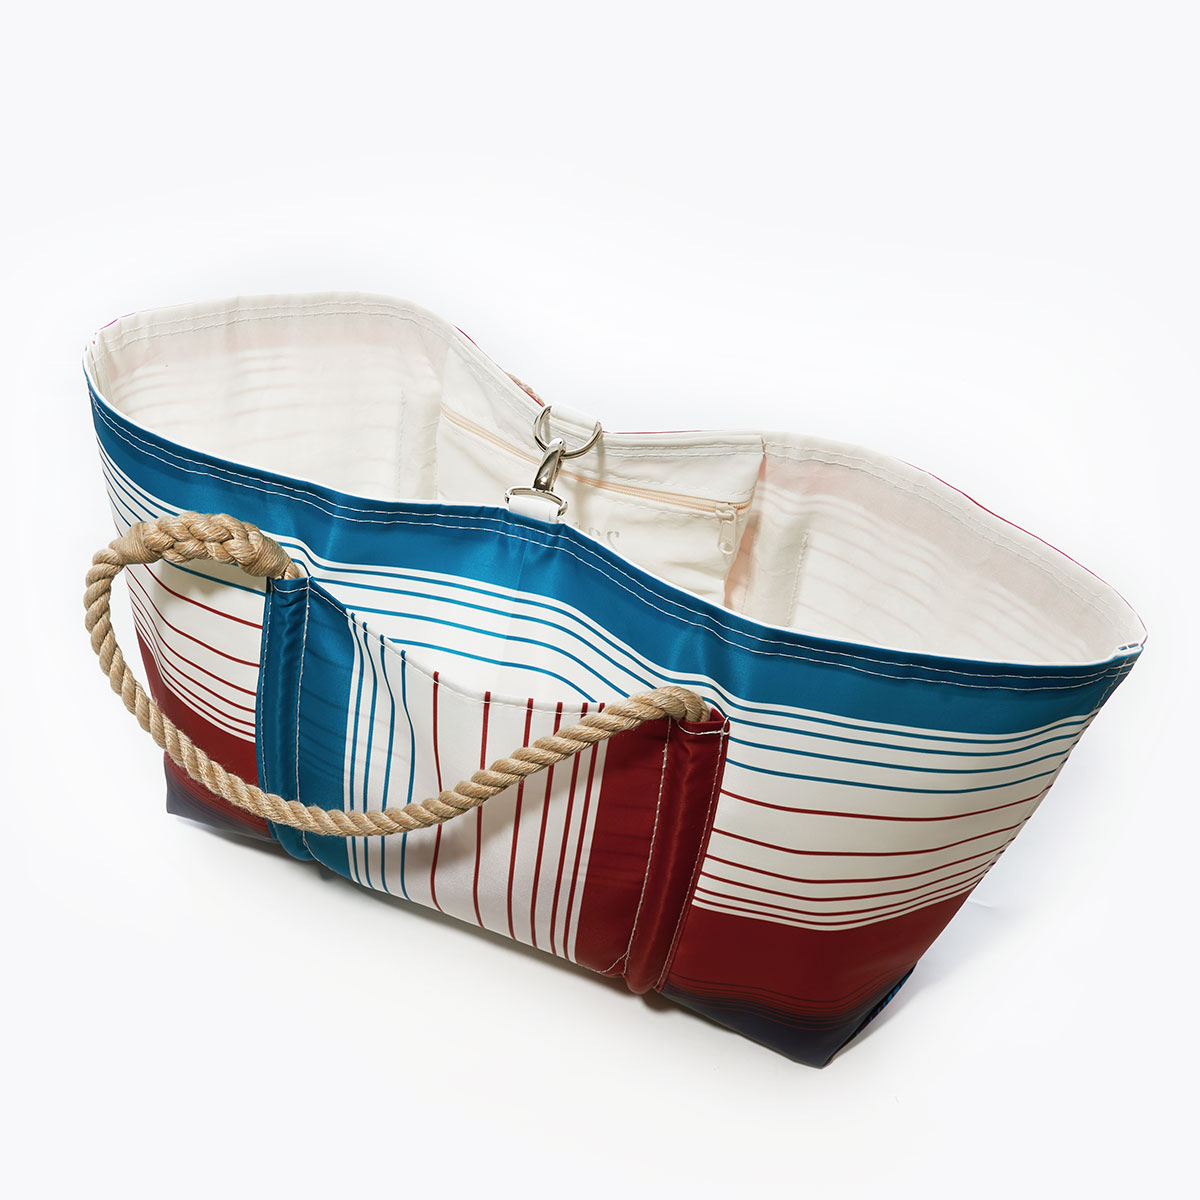 clasp closure of patriotic plaid stripes in red white and blue printed on recycled sail cloth large pier tote with hemp rope handles